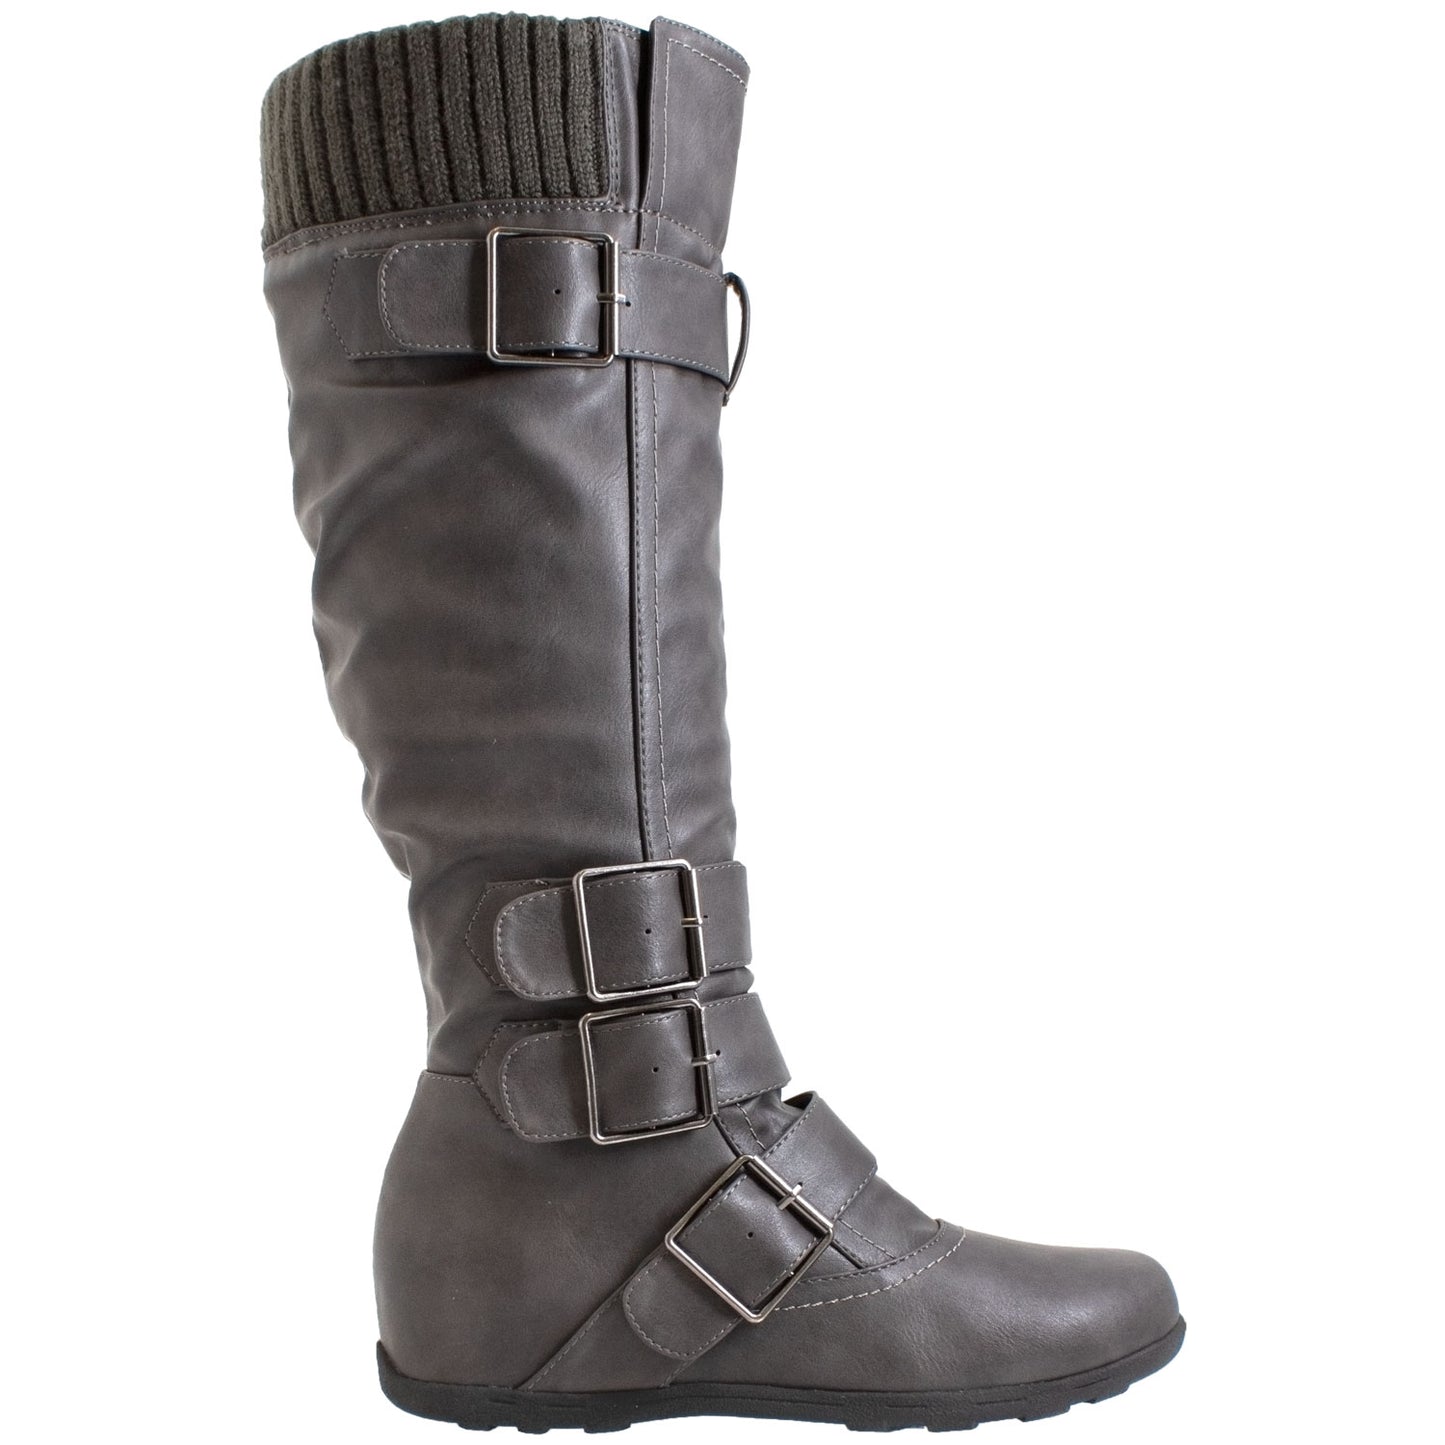 Generation Y Women's Knee High Boots Strappy Buckles Combat